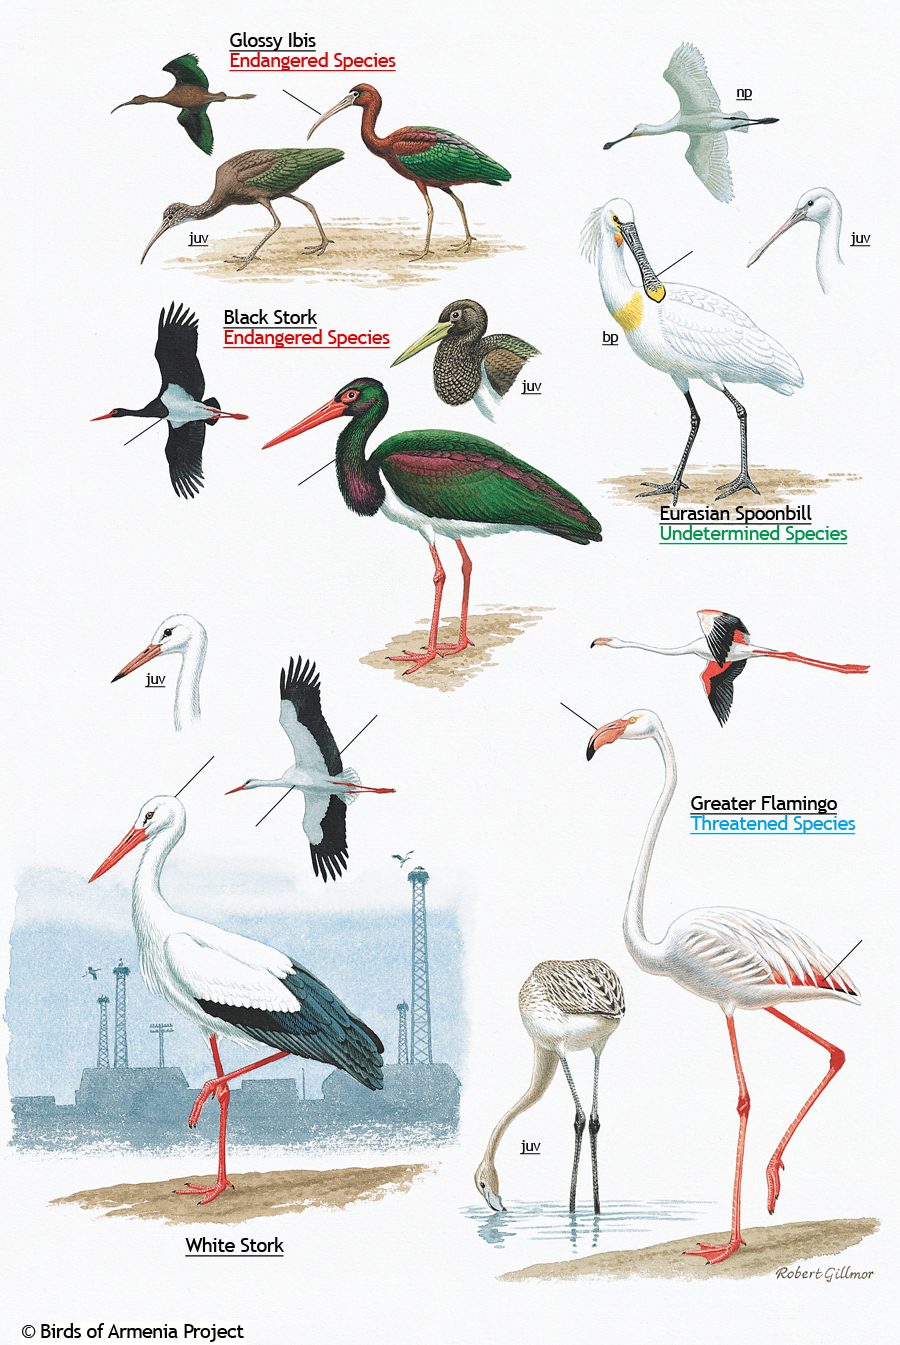 Ibis, Storks, Spoonbill and Flamingo